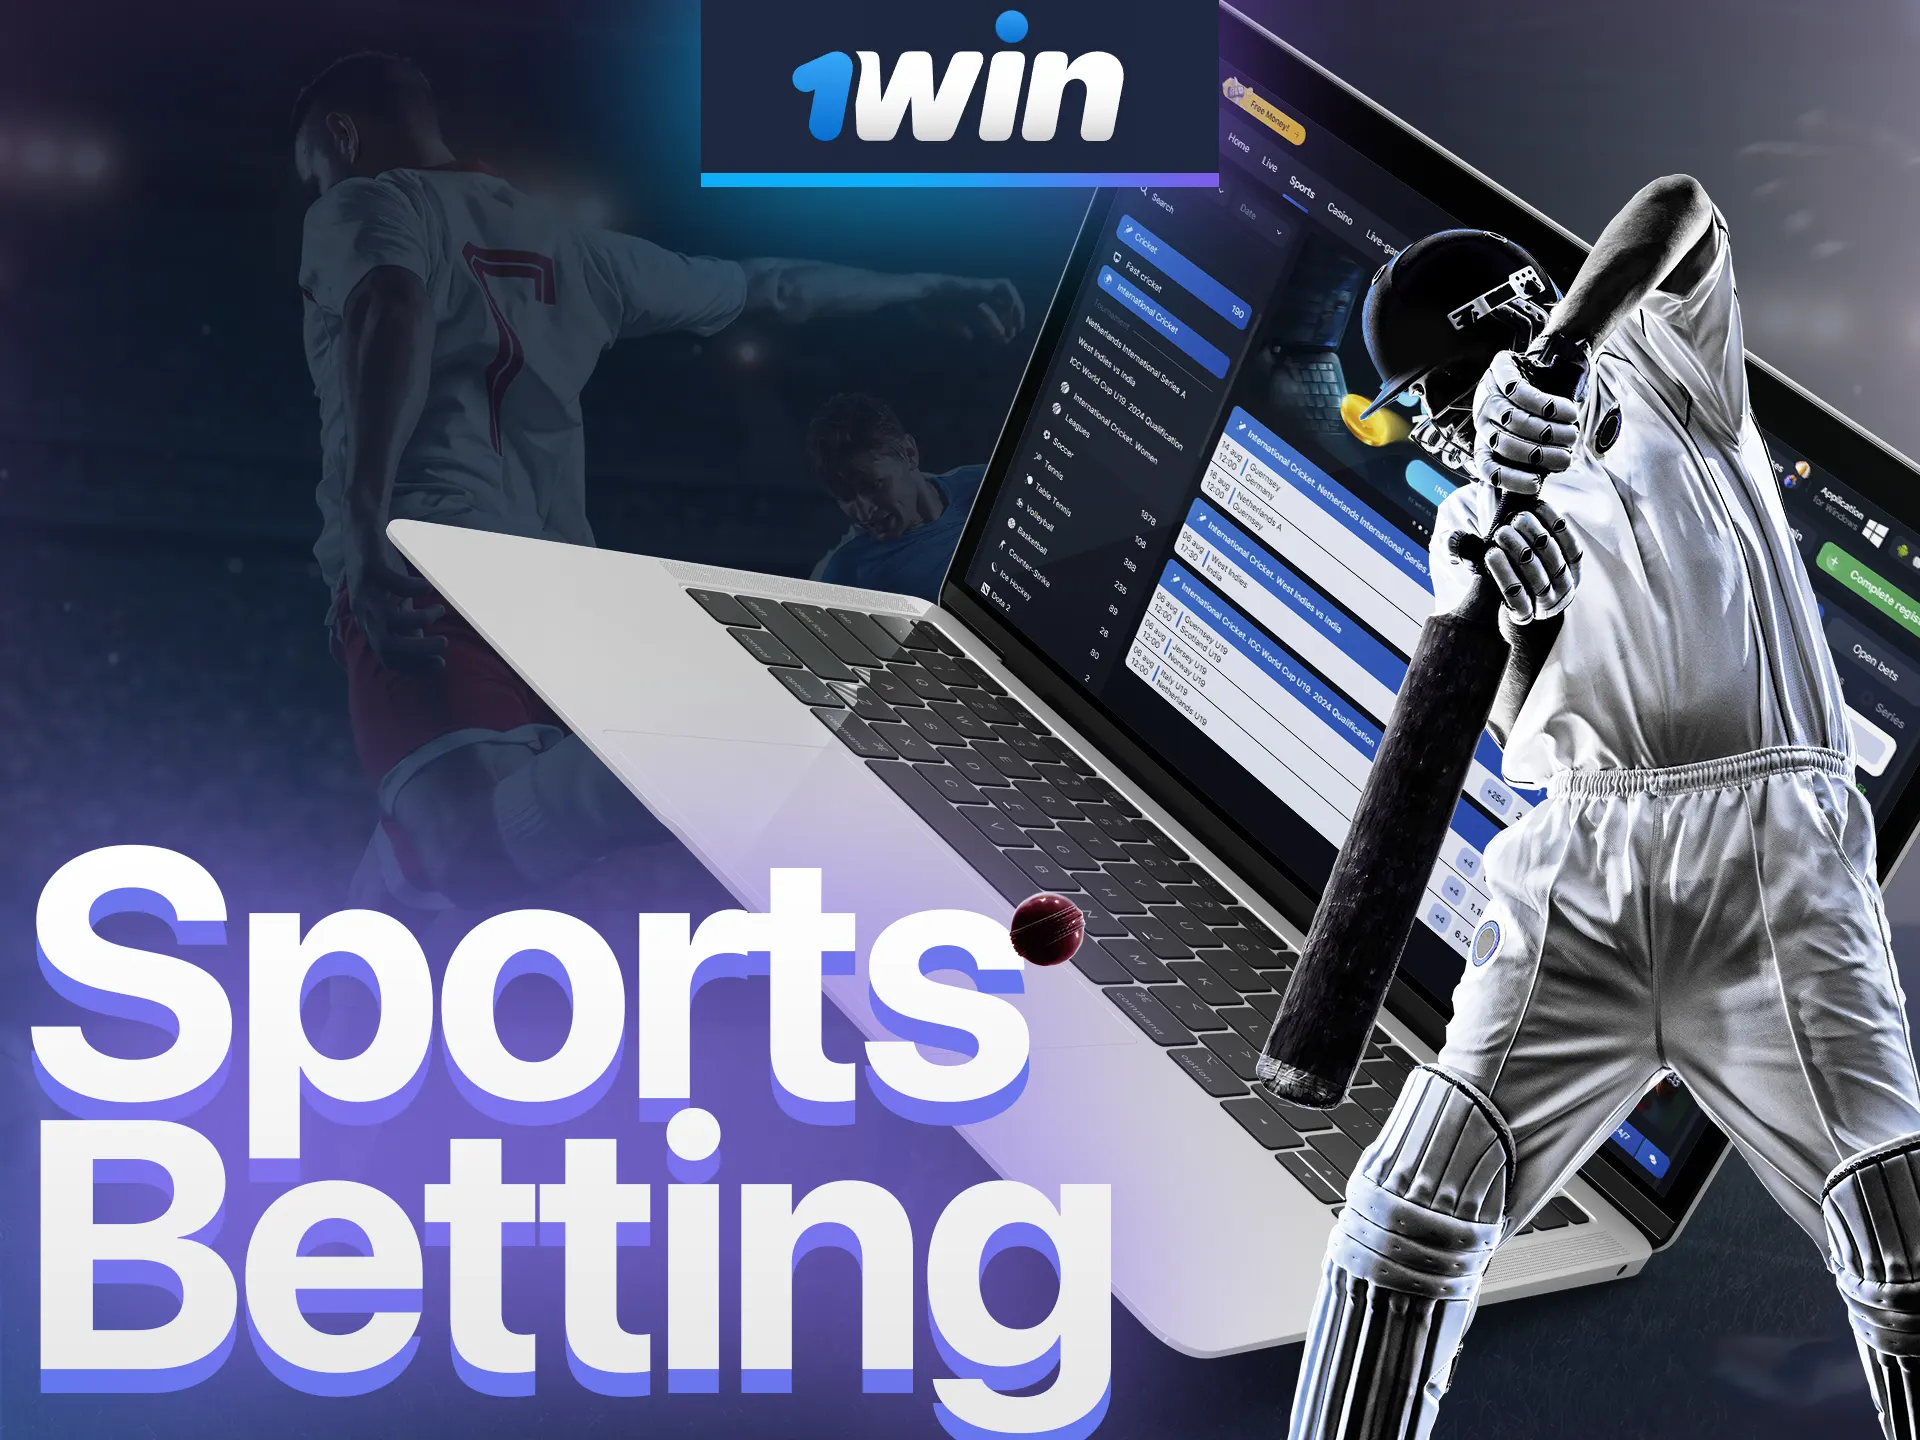 At 1win, sports betting enthusiasts can take advantage of a wide range of sports betting options.